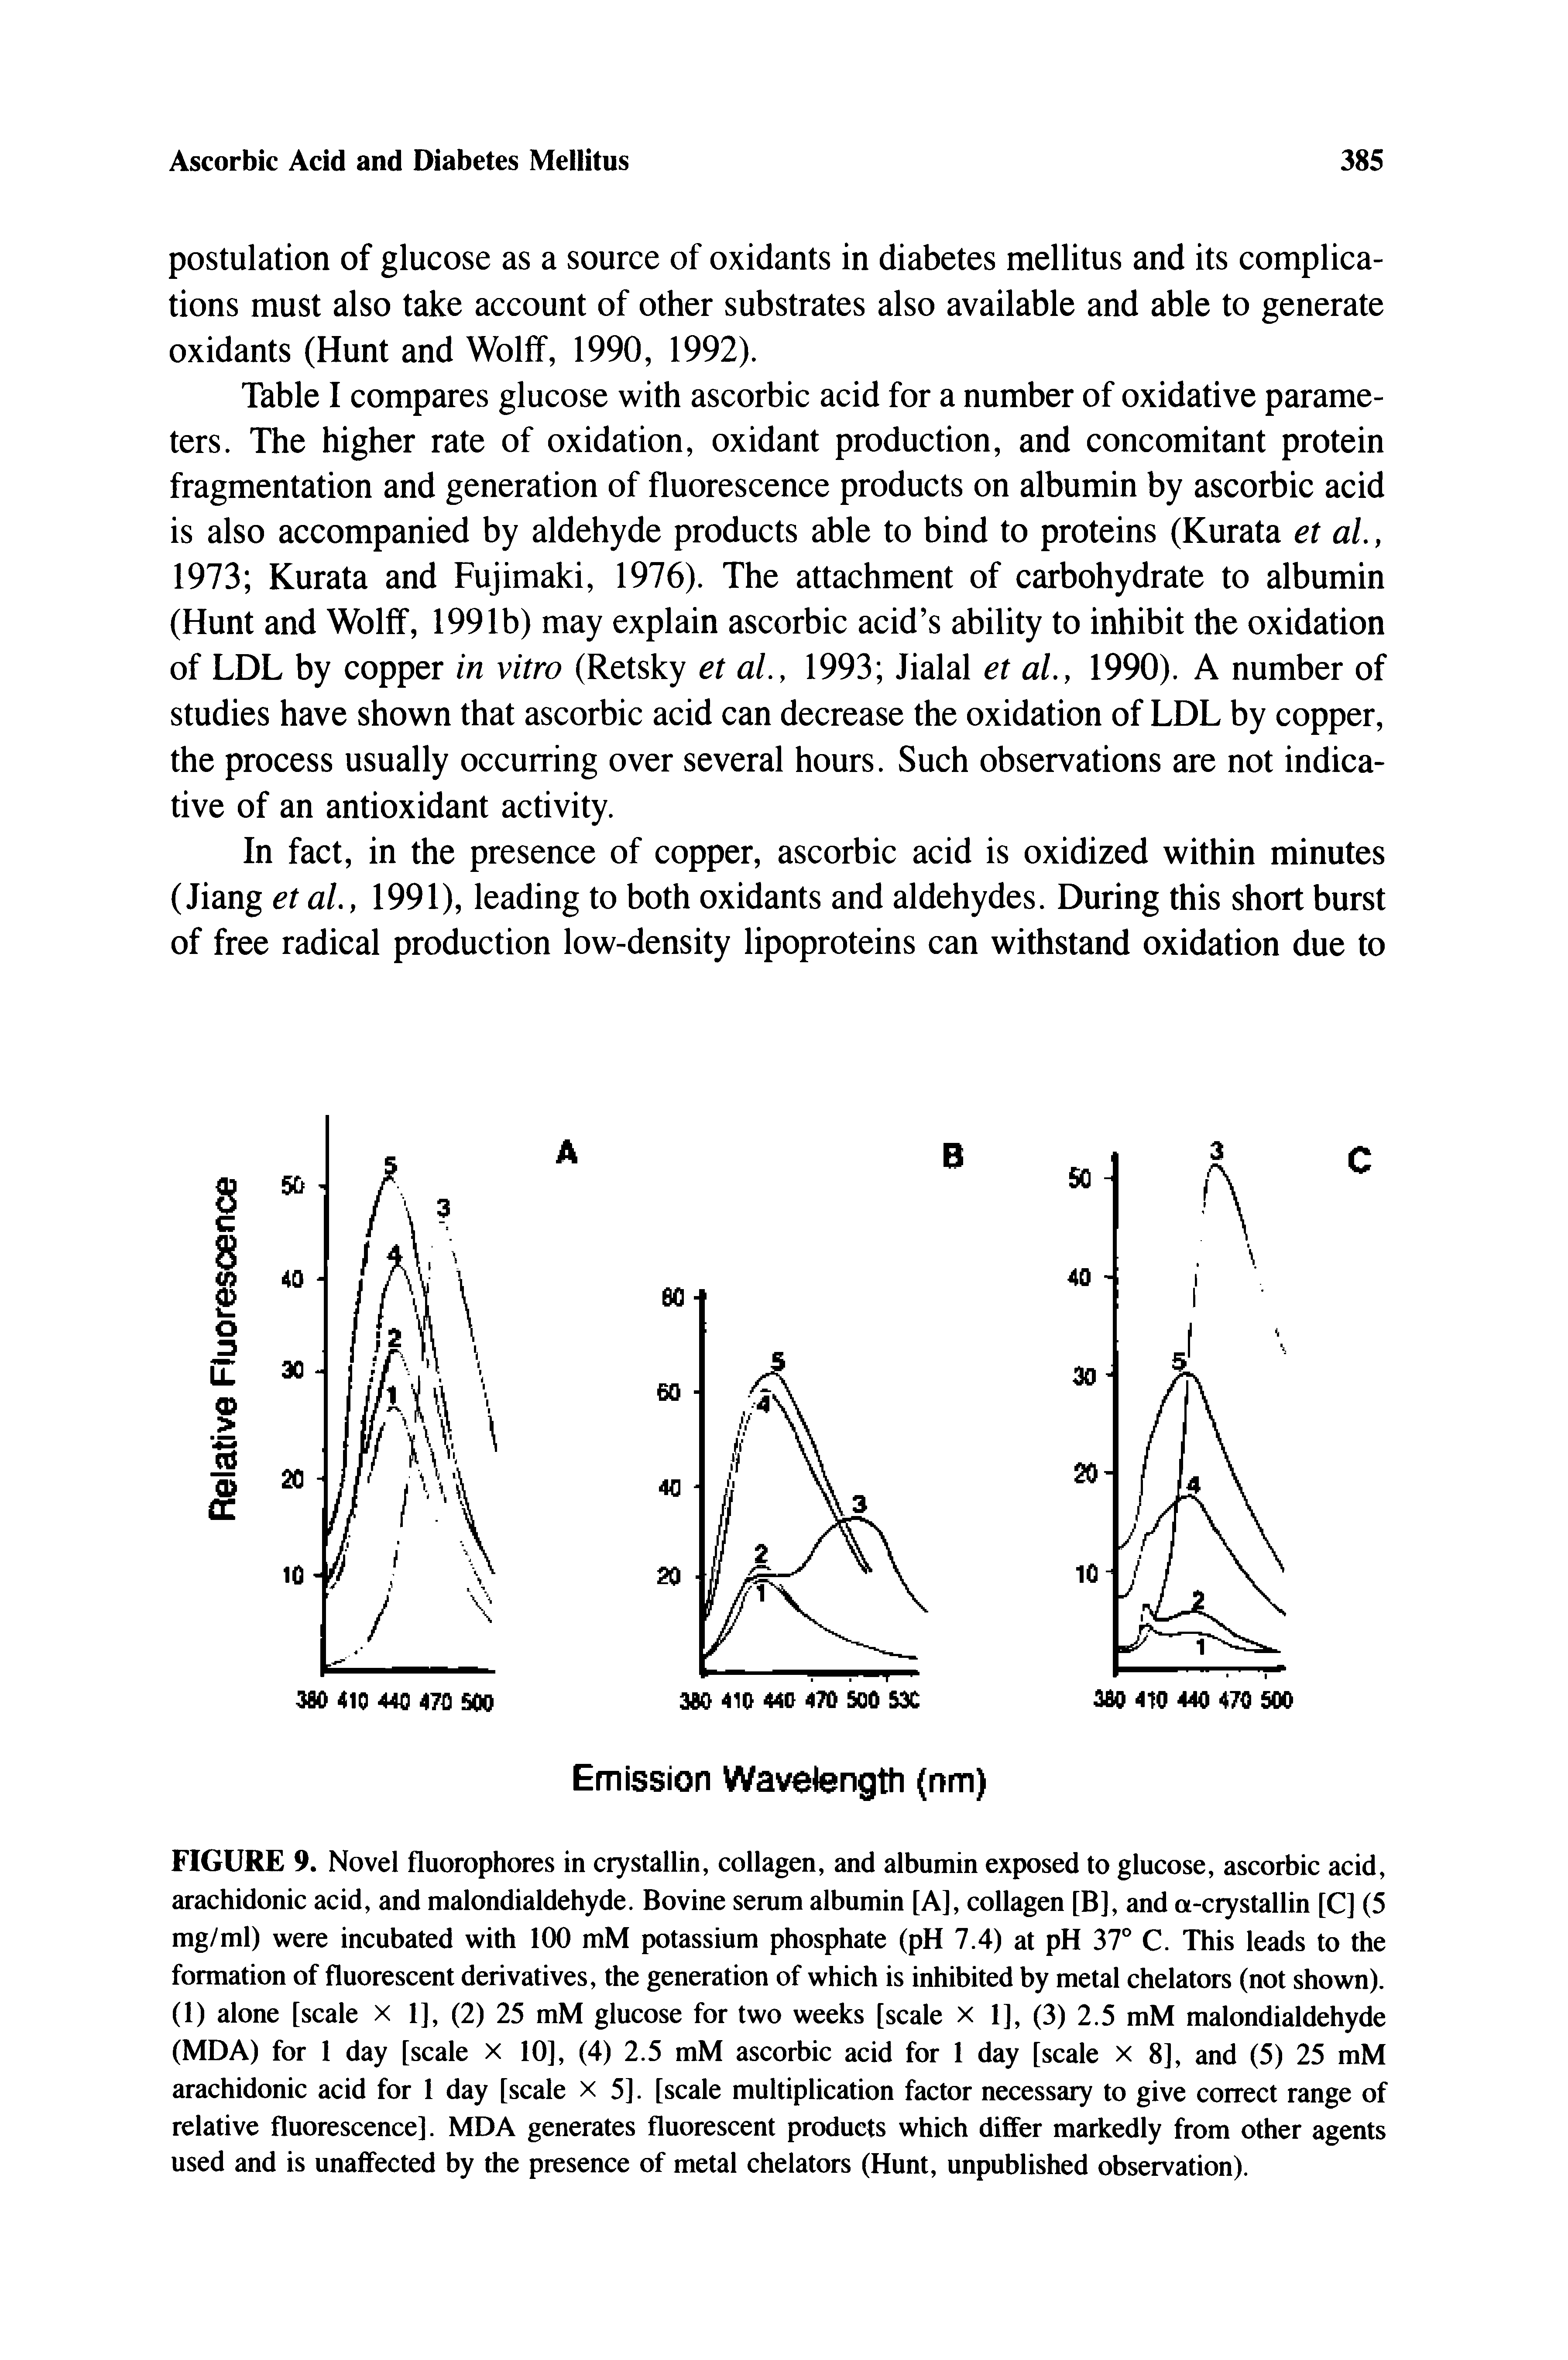 Table I compares glucose with ascorbic acid for a number of oxidative parameters. The higher rate of oxidation, oxidant production, and concomitant protein fragmentation and generation of fluorescence products on albumin by ascorbic acid is also accompanied by aldehyde products able to bind to proteins (Kurata et al, 1973 Kurata and Fujimaki, 1976). The attachment of carbohydrate to albumin (Hunt and Wolff, 1991b) may explain ascorbic acid s ability to inhibit the oxidation of LDL by copper in vitro (Retsky et al., 1993 Jialal et al, 1990). A number of studies have shown that ascorbic acid can decrease the oxidation of LDL by copper, the process usually occurring over several hours. Such observations are not indicative of an antioxidant activity.